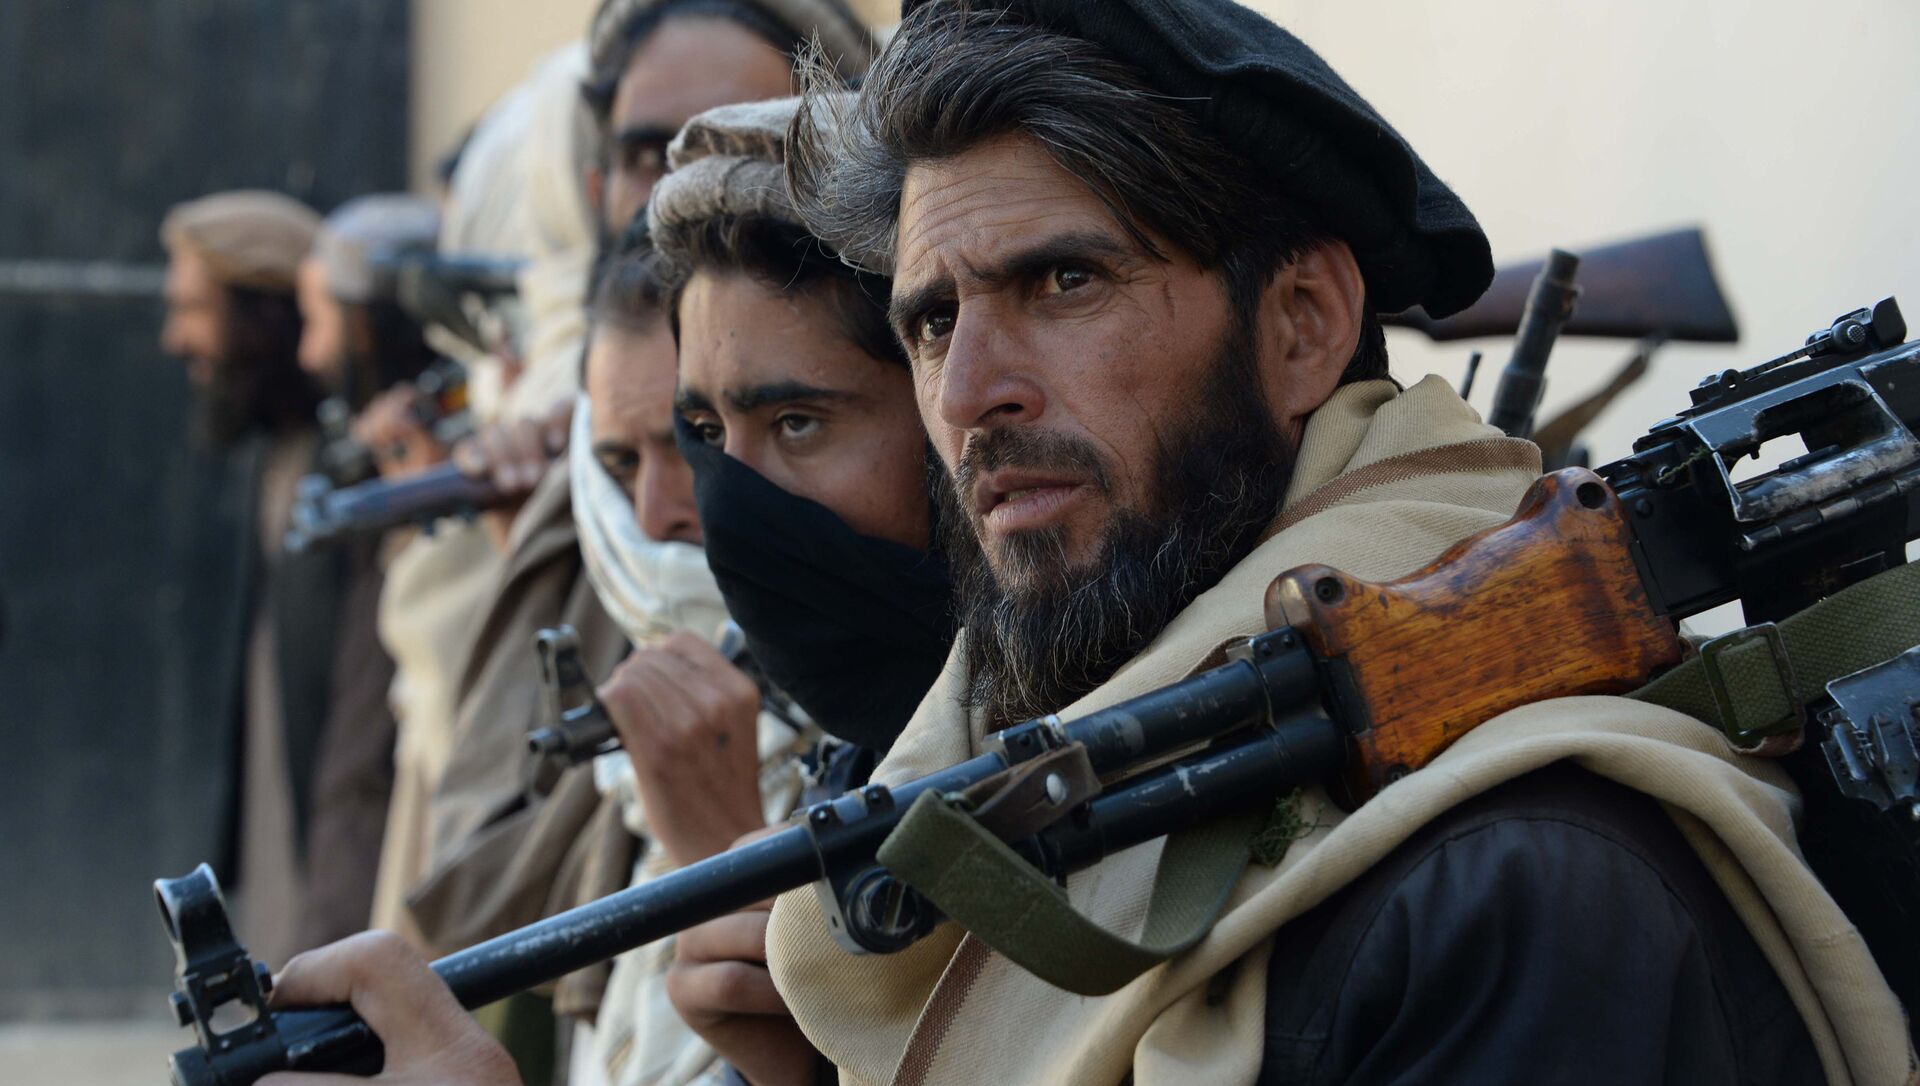 Afghan alleged former Taliban fighters carry their weapons before handing them over as part of a government peace and reconciliation process at a ceremony in Jalalabad on February 24, 2016 - Sputnik International, 1920, 28.06.2021